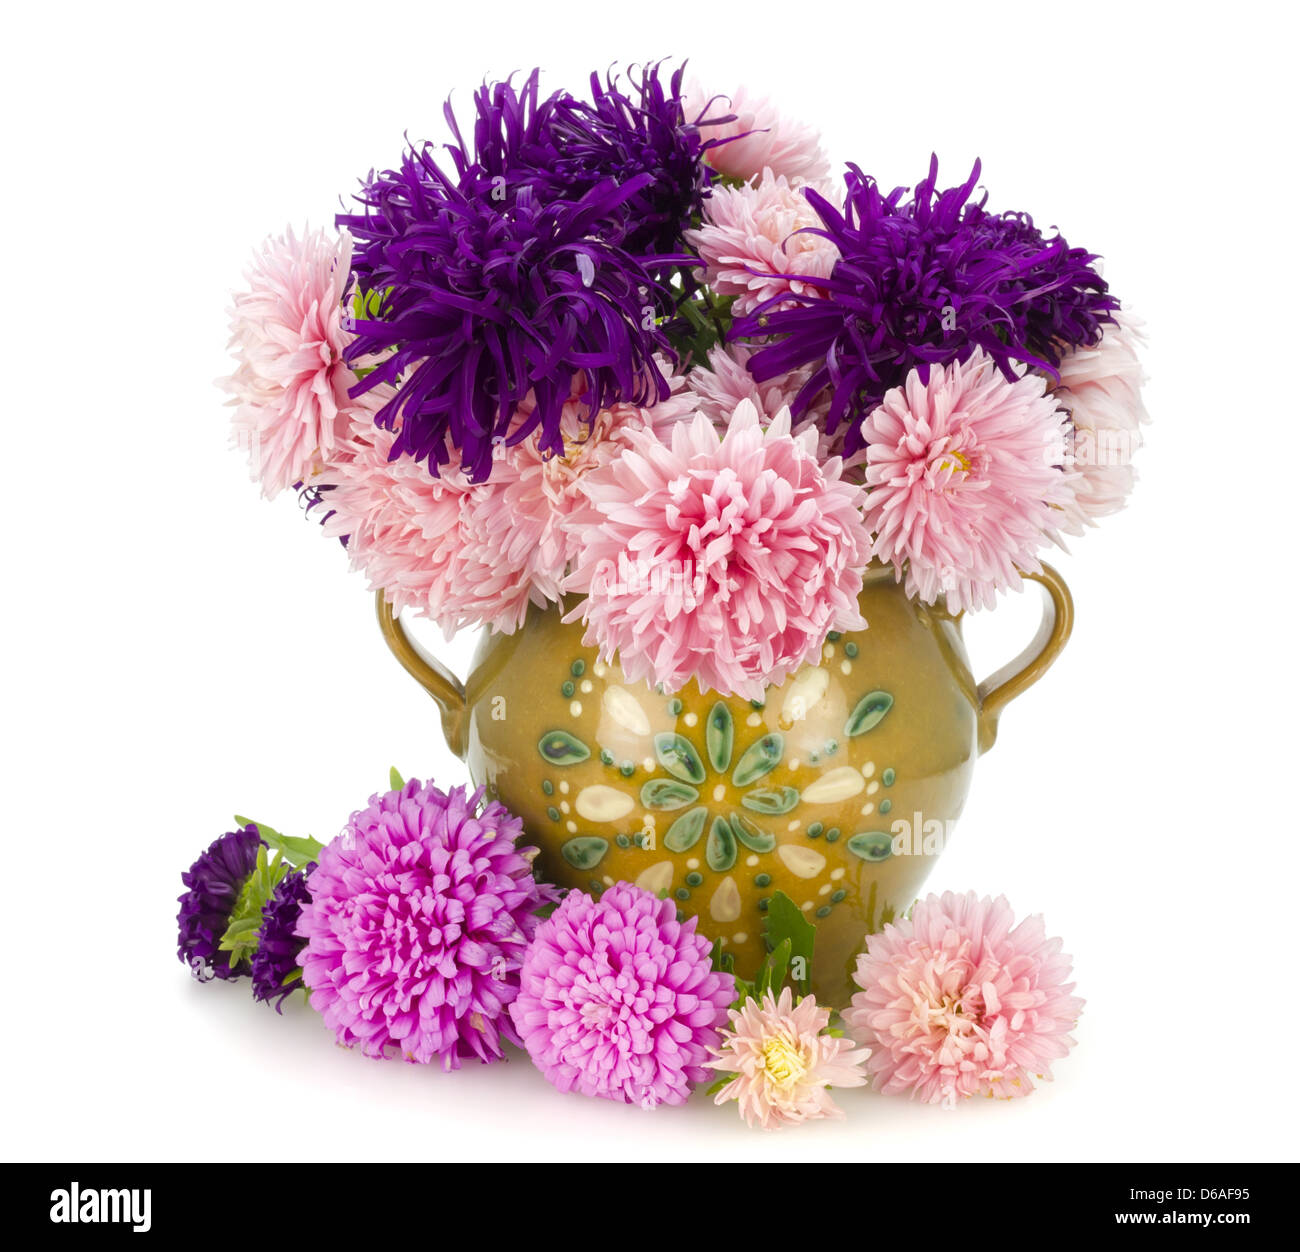 Pink and violet autumn asters in jug Stock Photo